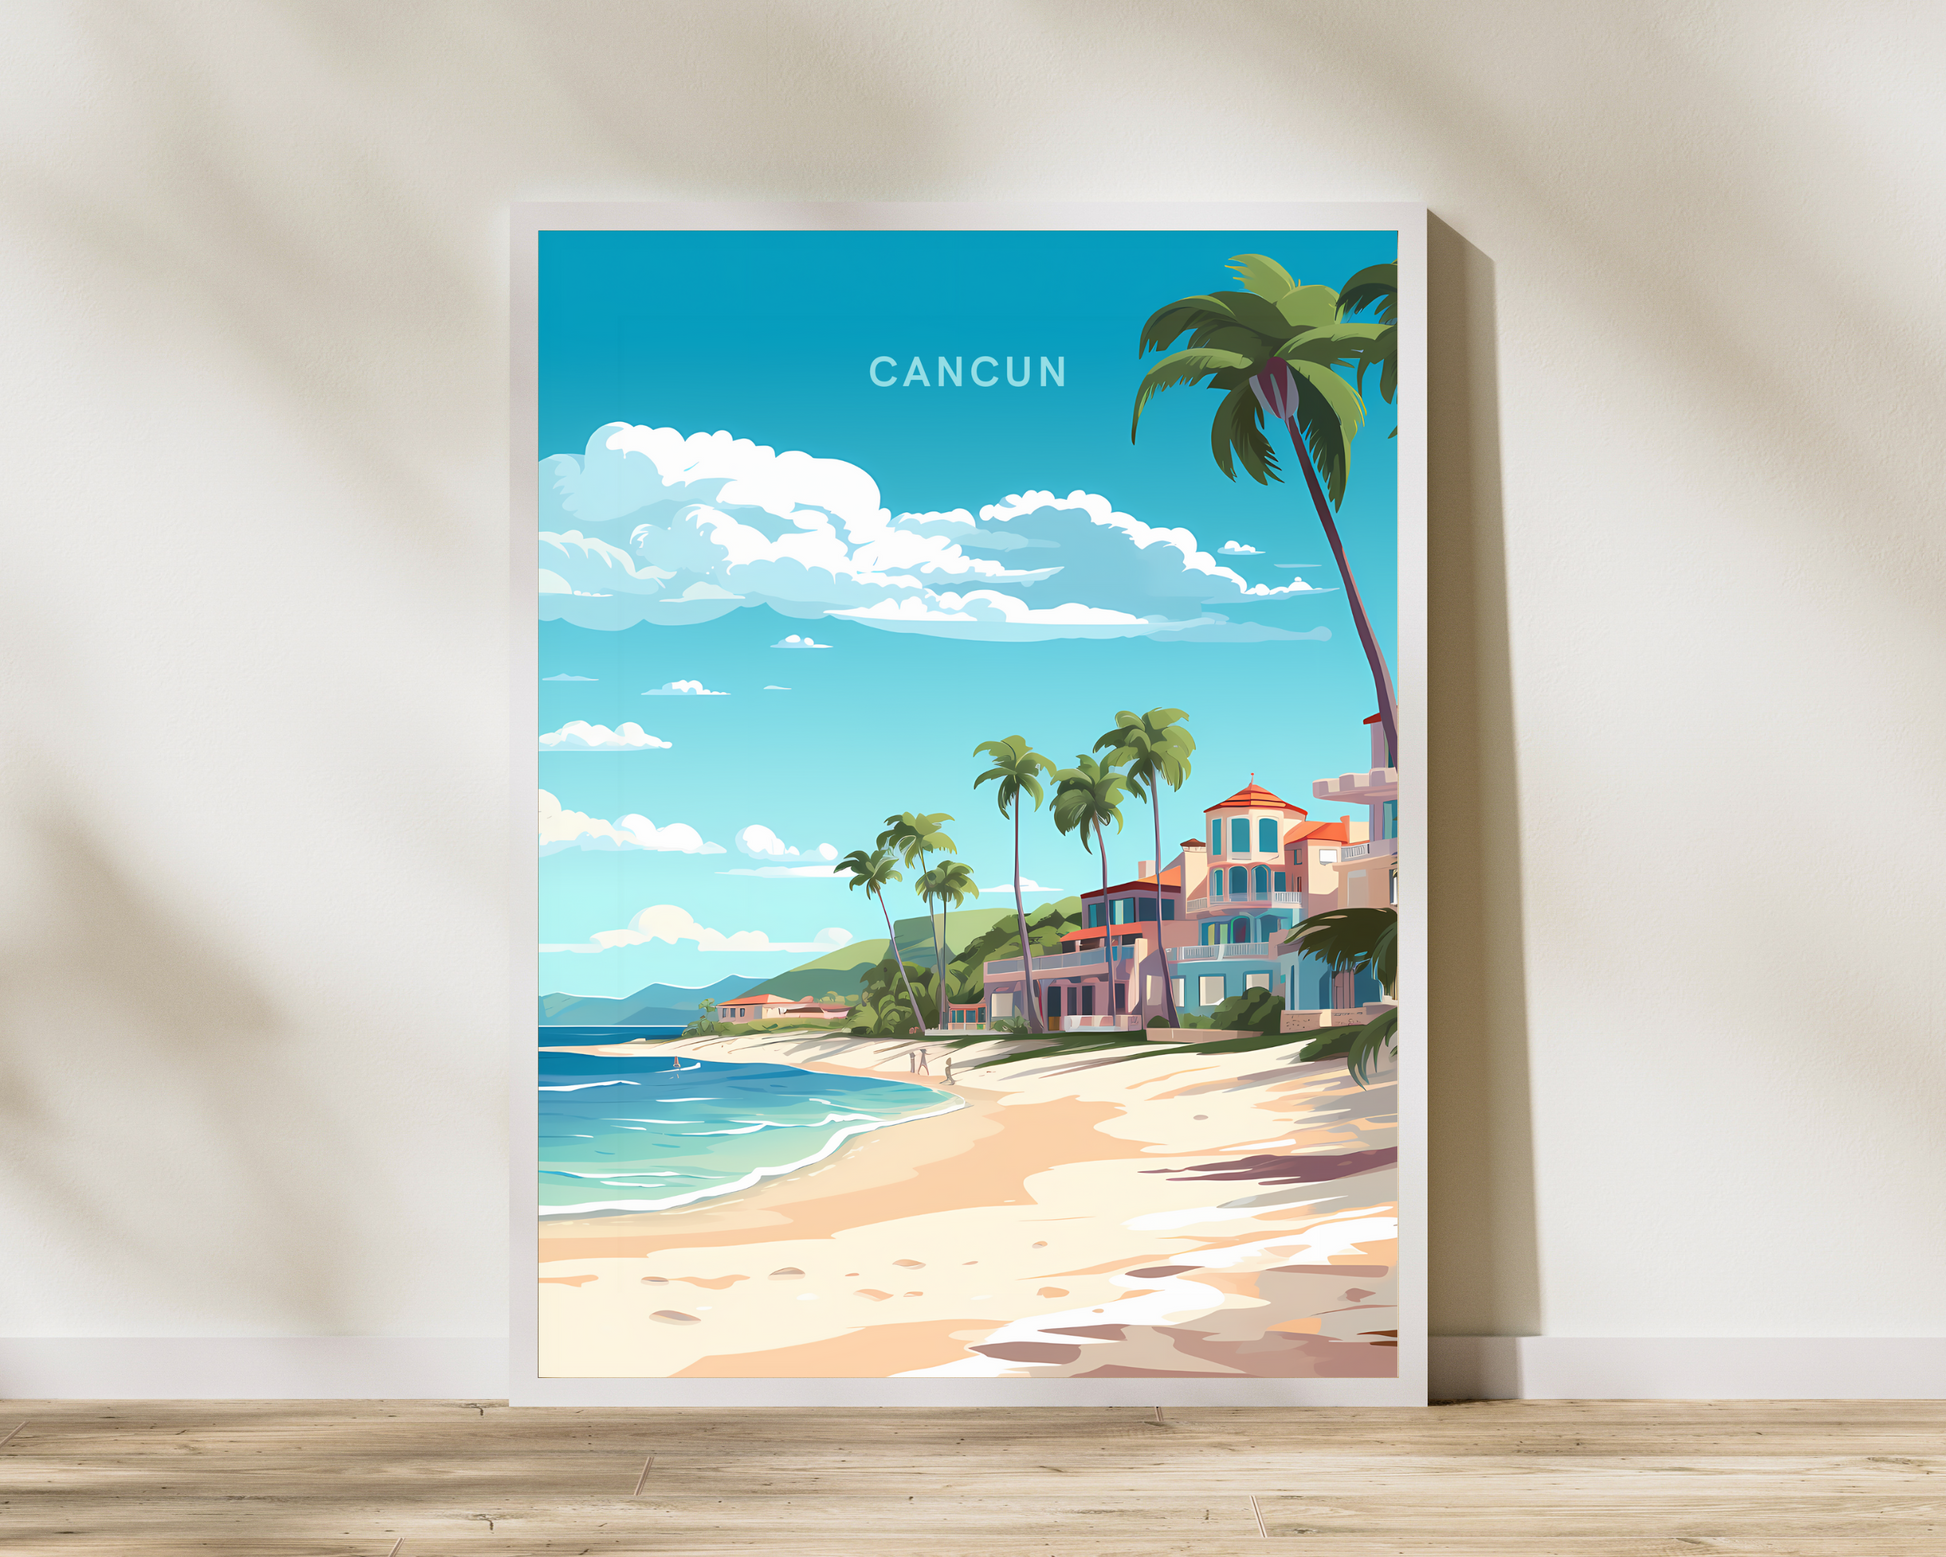 Cancun Mexico Travel Poster Print - Pitchers Design